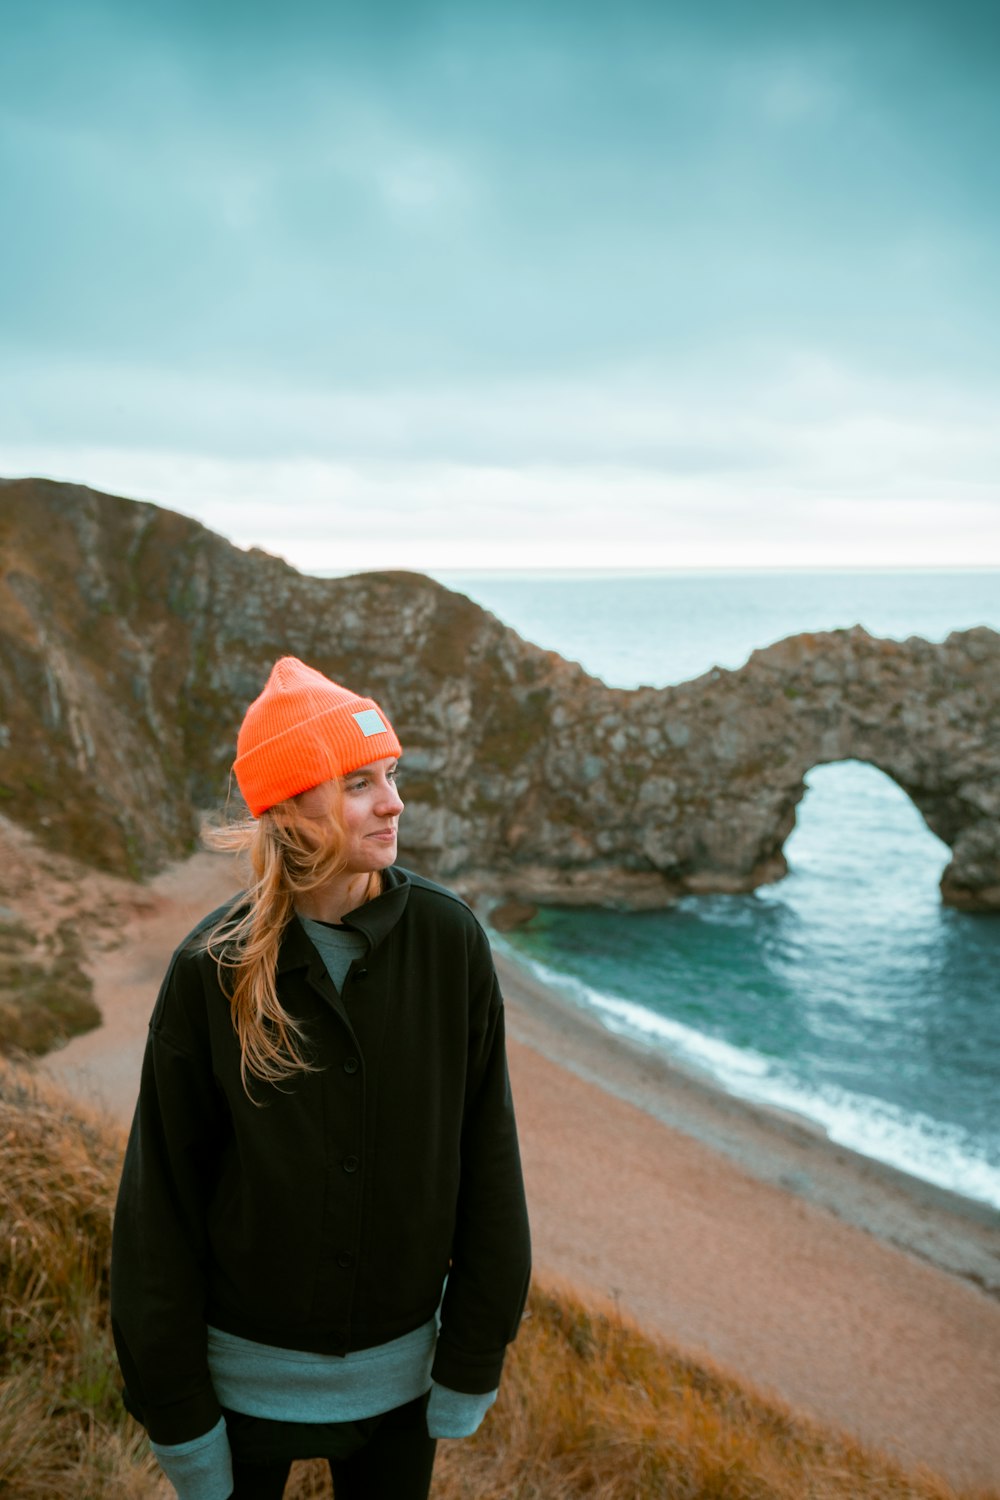 woman in black jacket and orange knit cap standing on beach shore during daytime